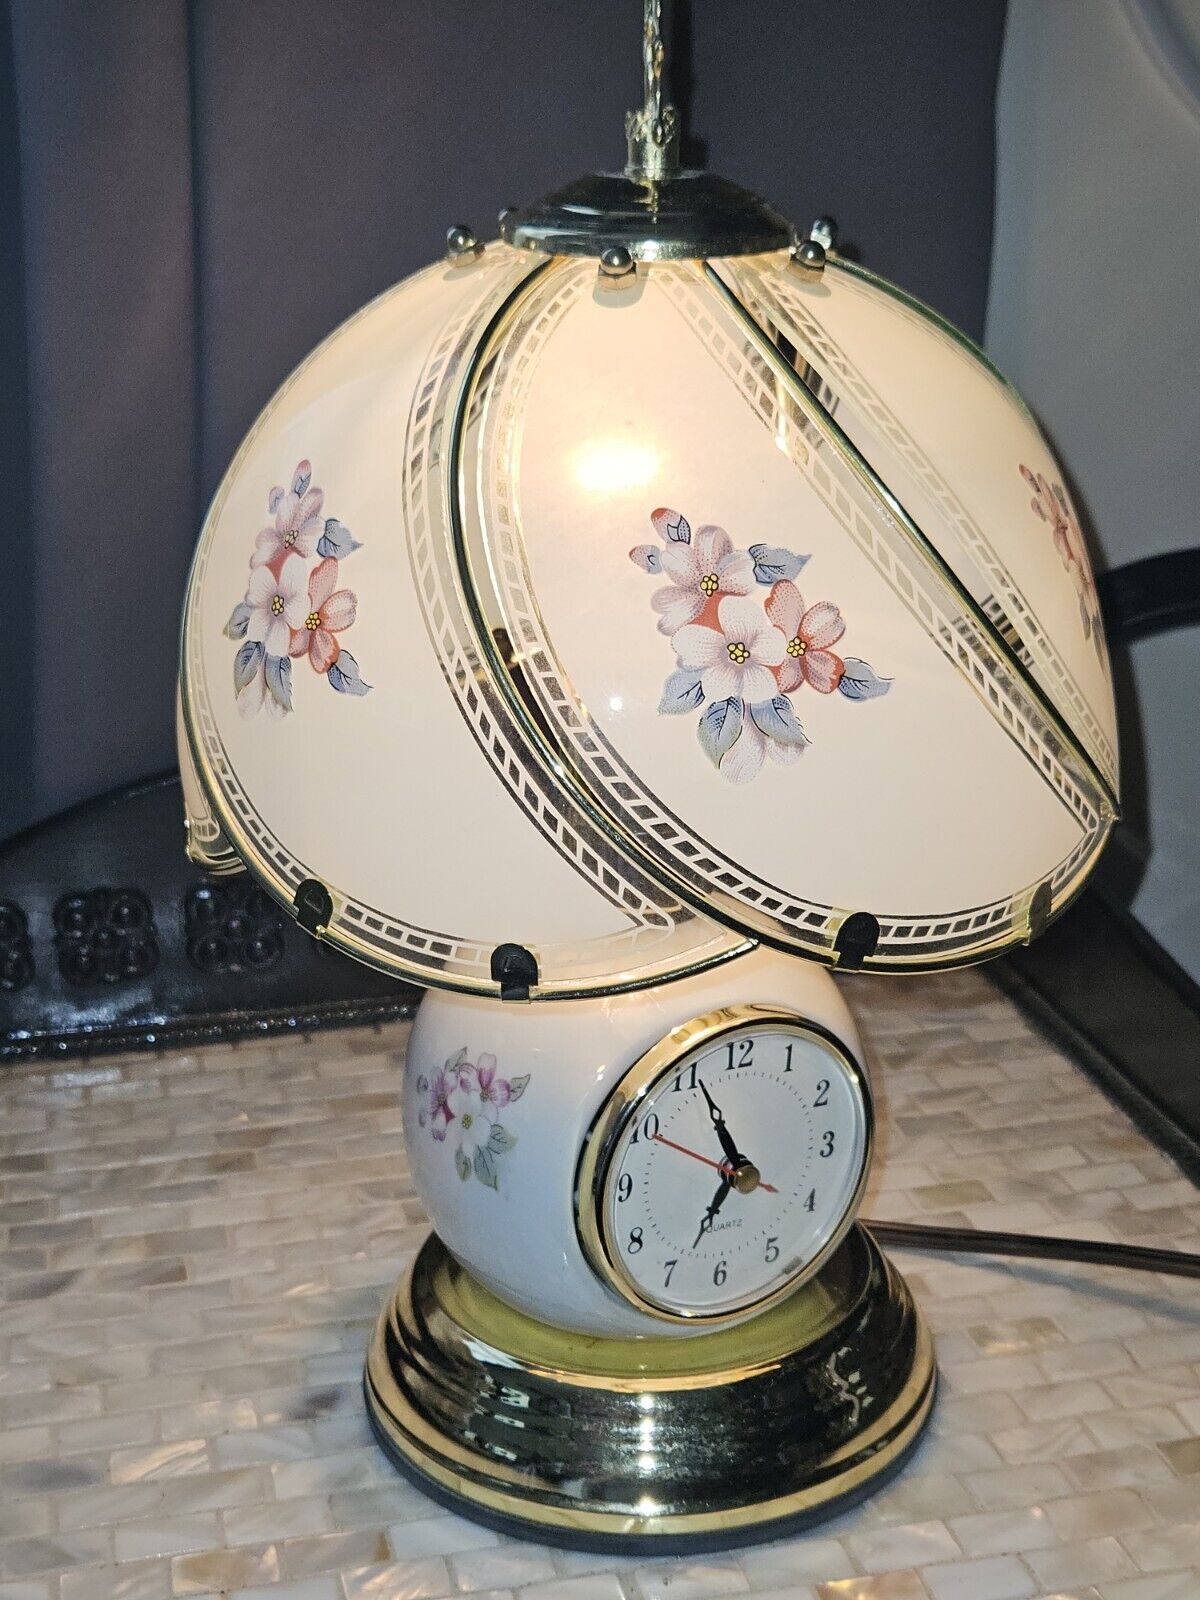 14 Invh Vintage Touch Lamp With Clock Shade 6 Glass Panels Roses Metal Frame